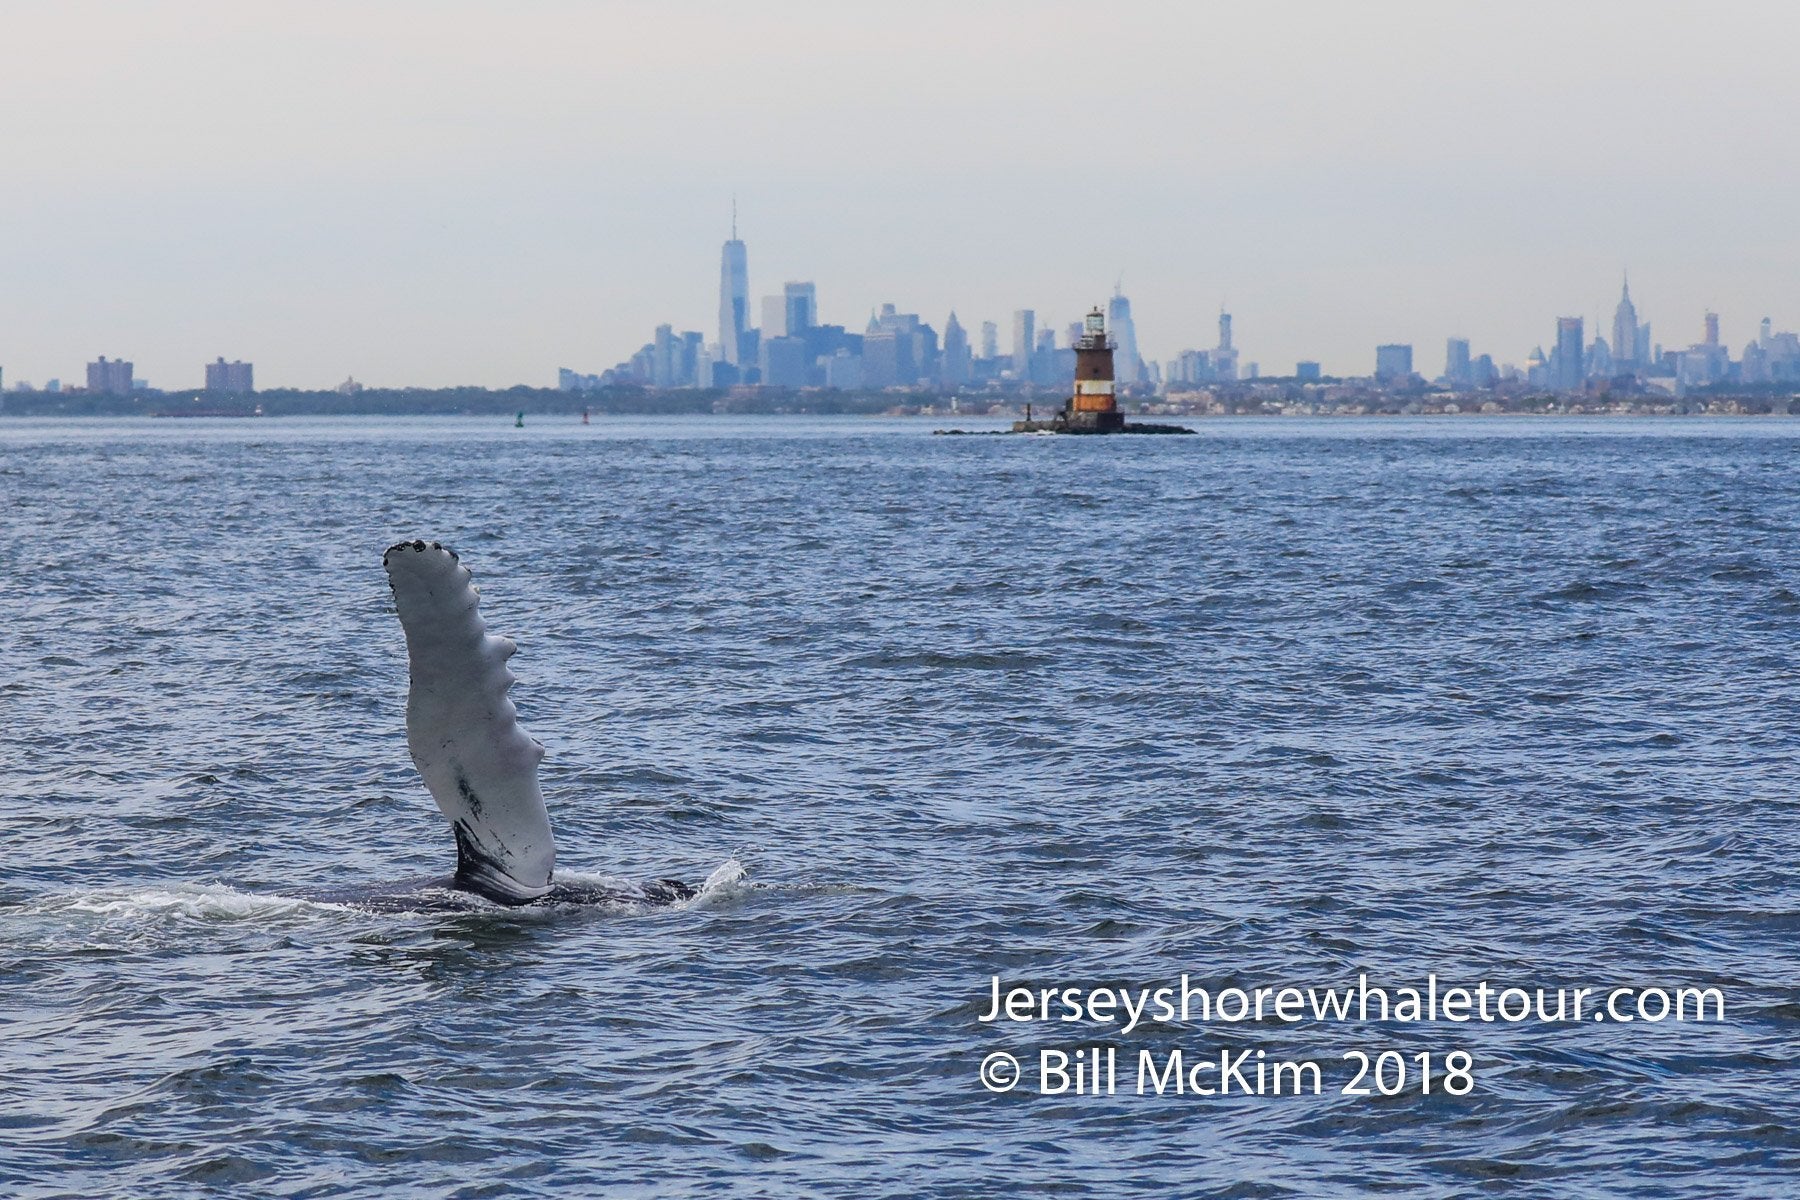 July Whale watching trip successful